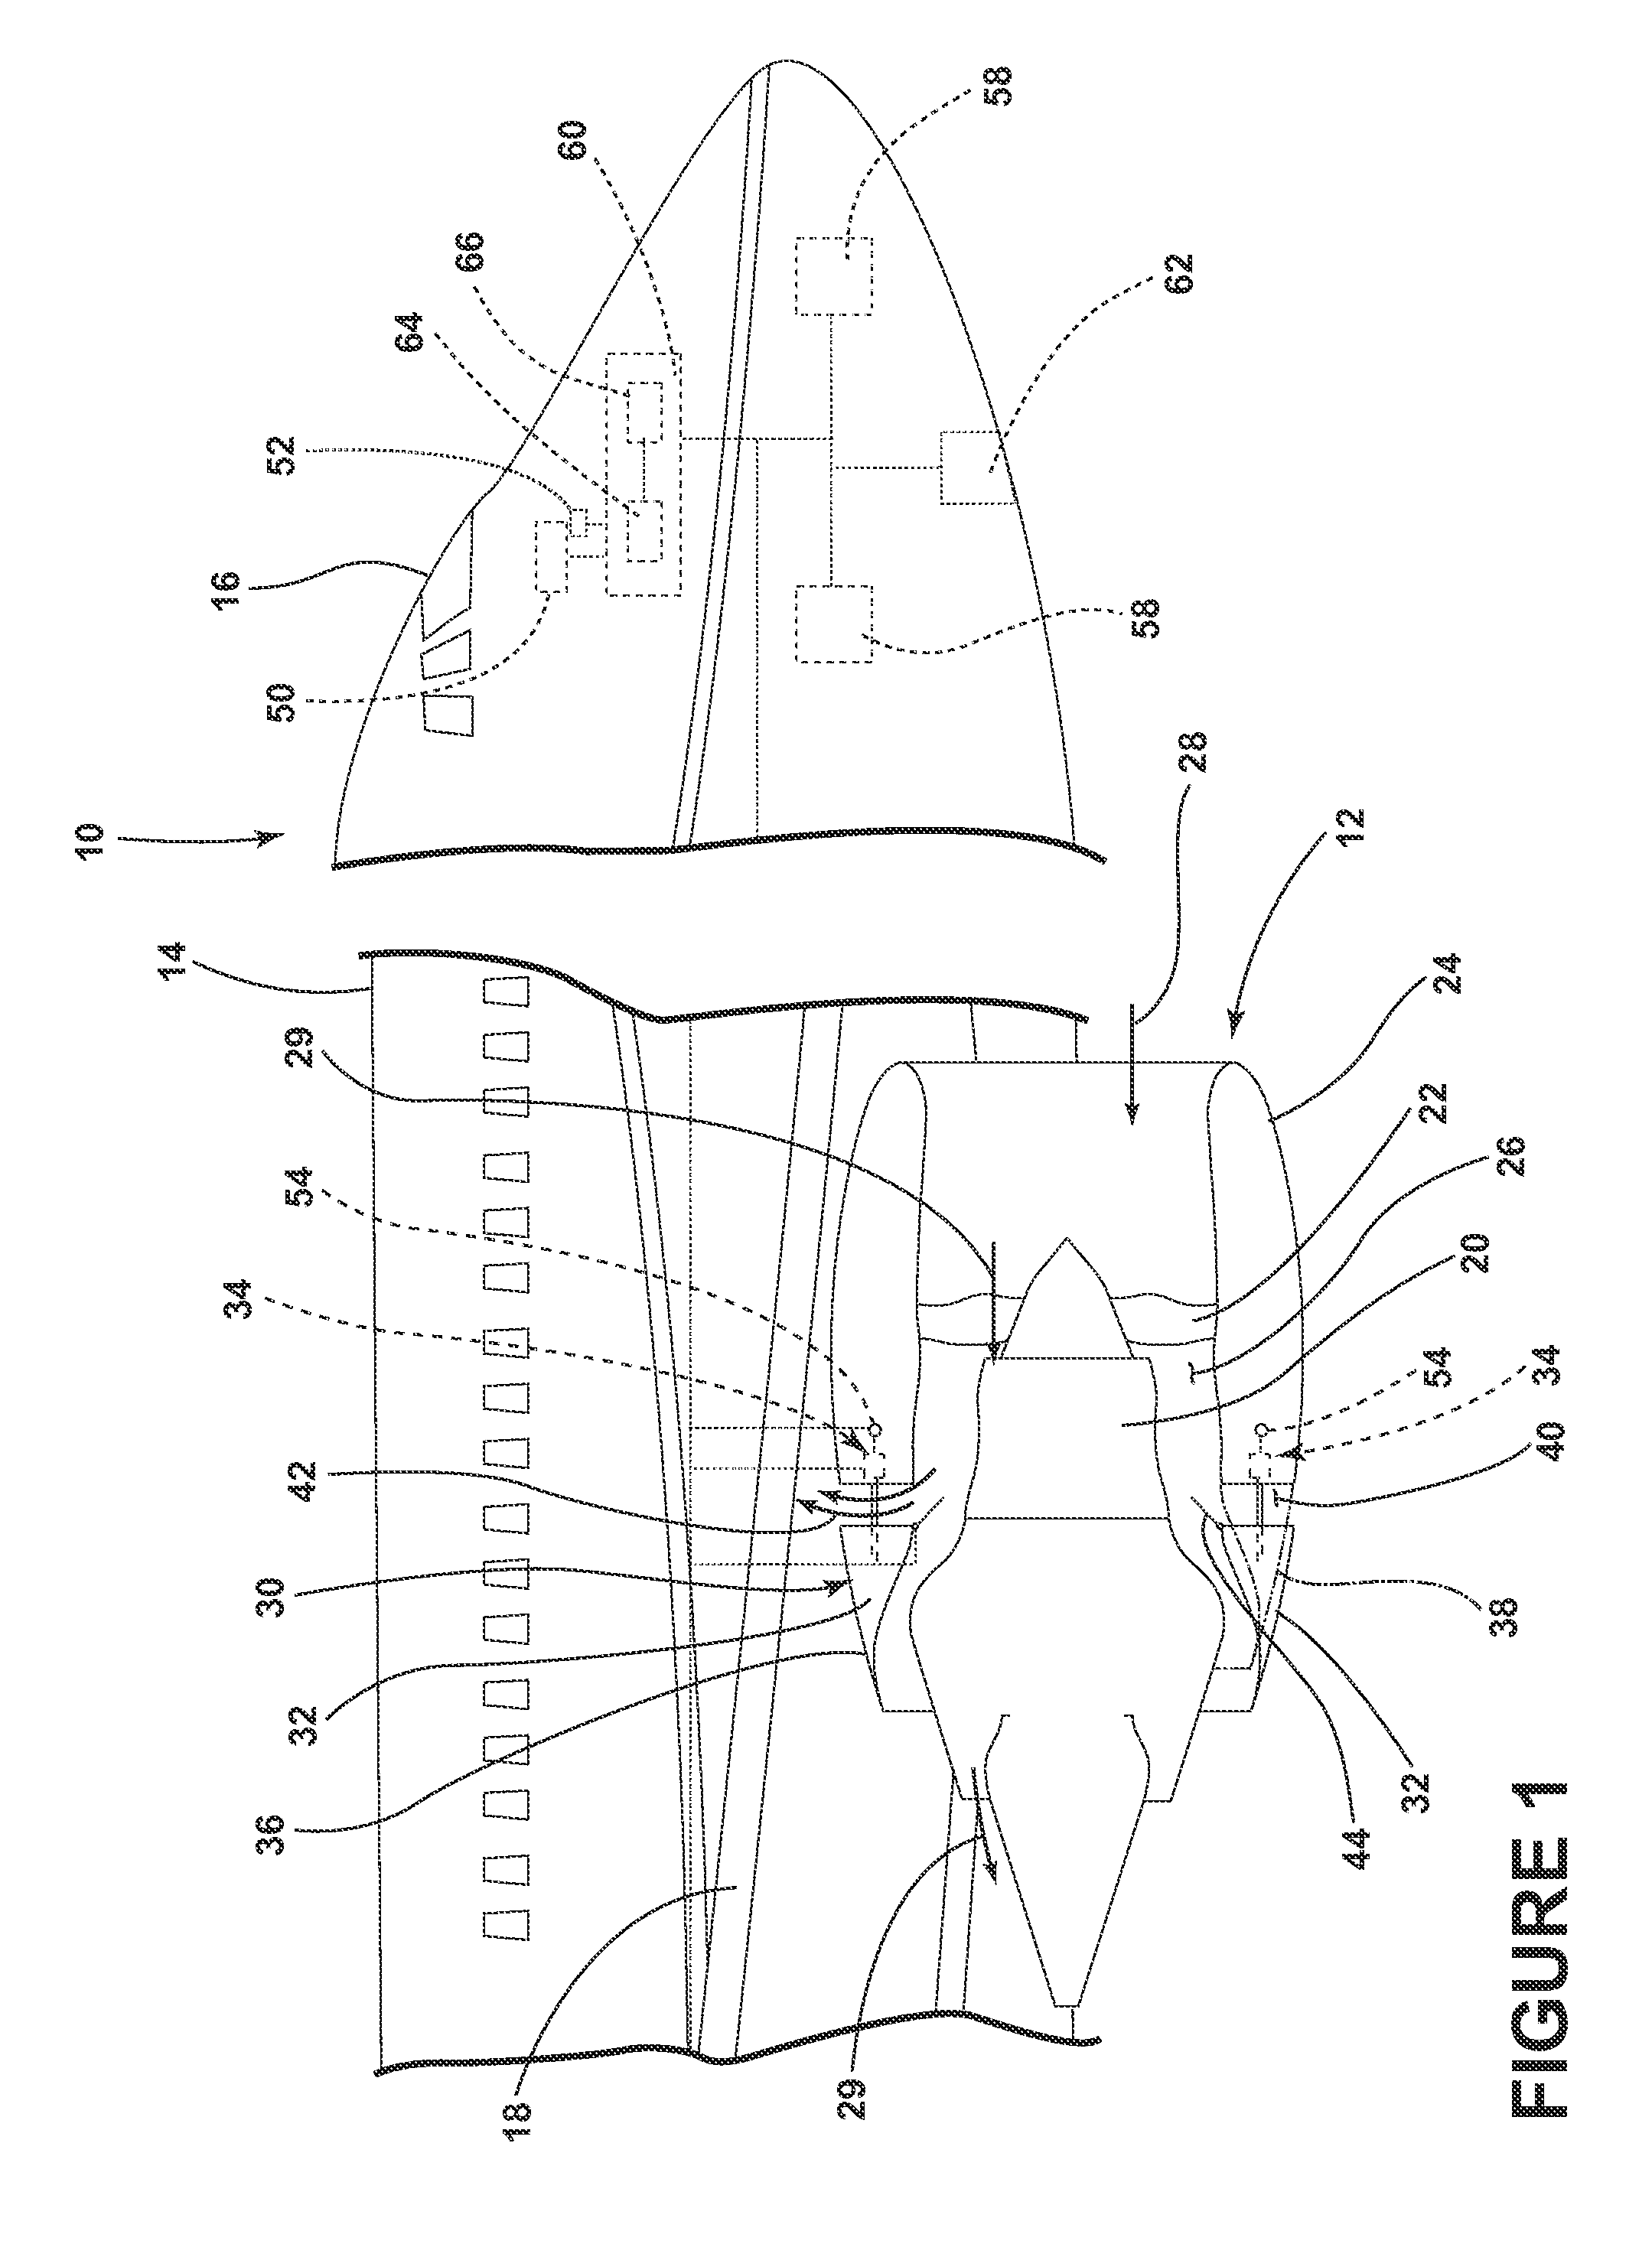 Method for predicting faults in an aircraft thrust reverser system